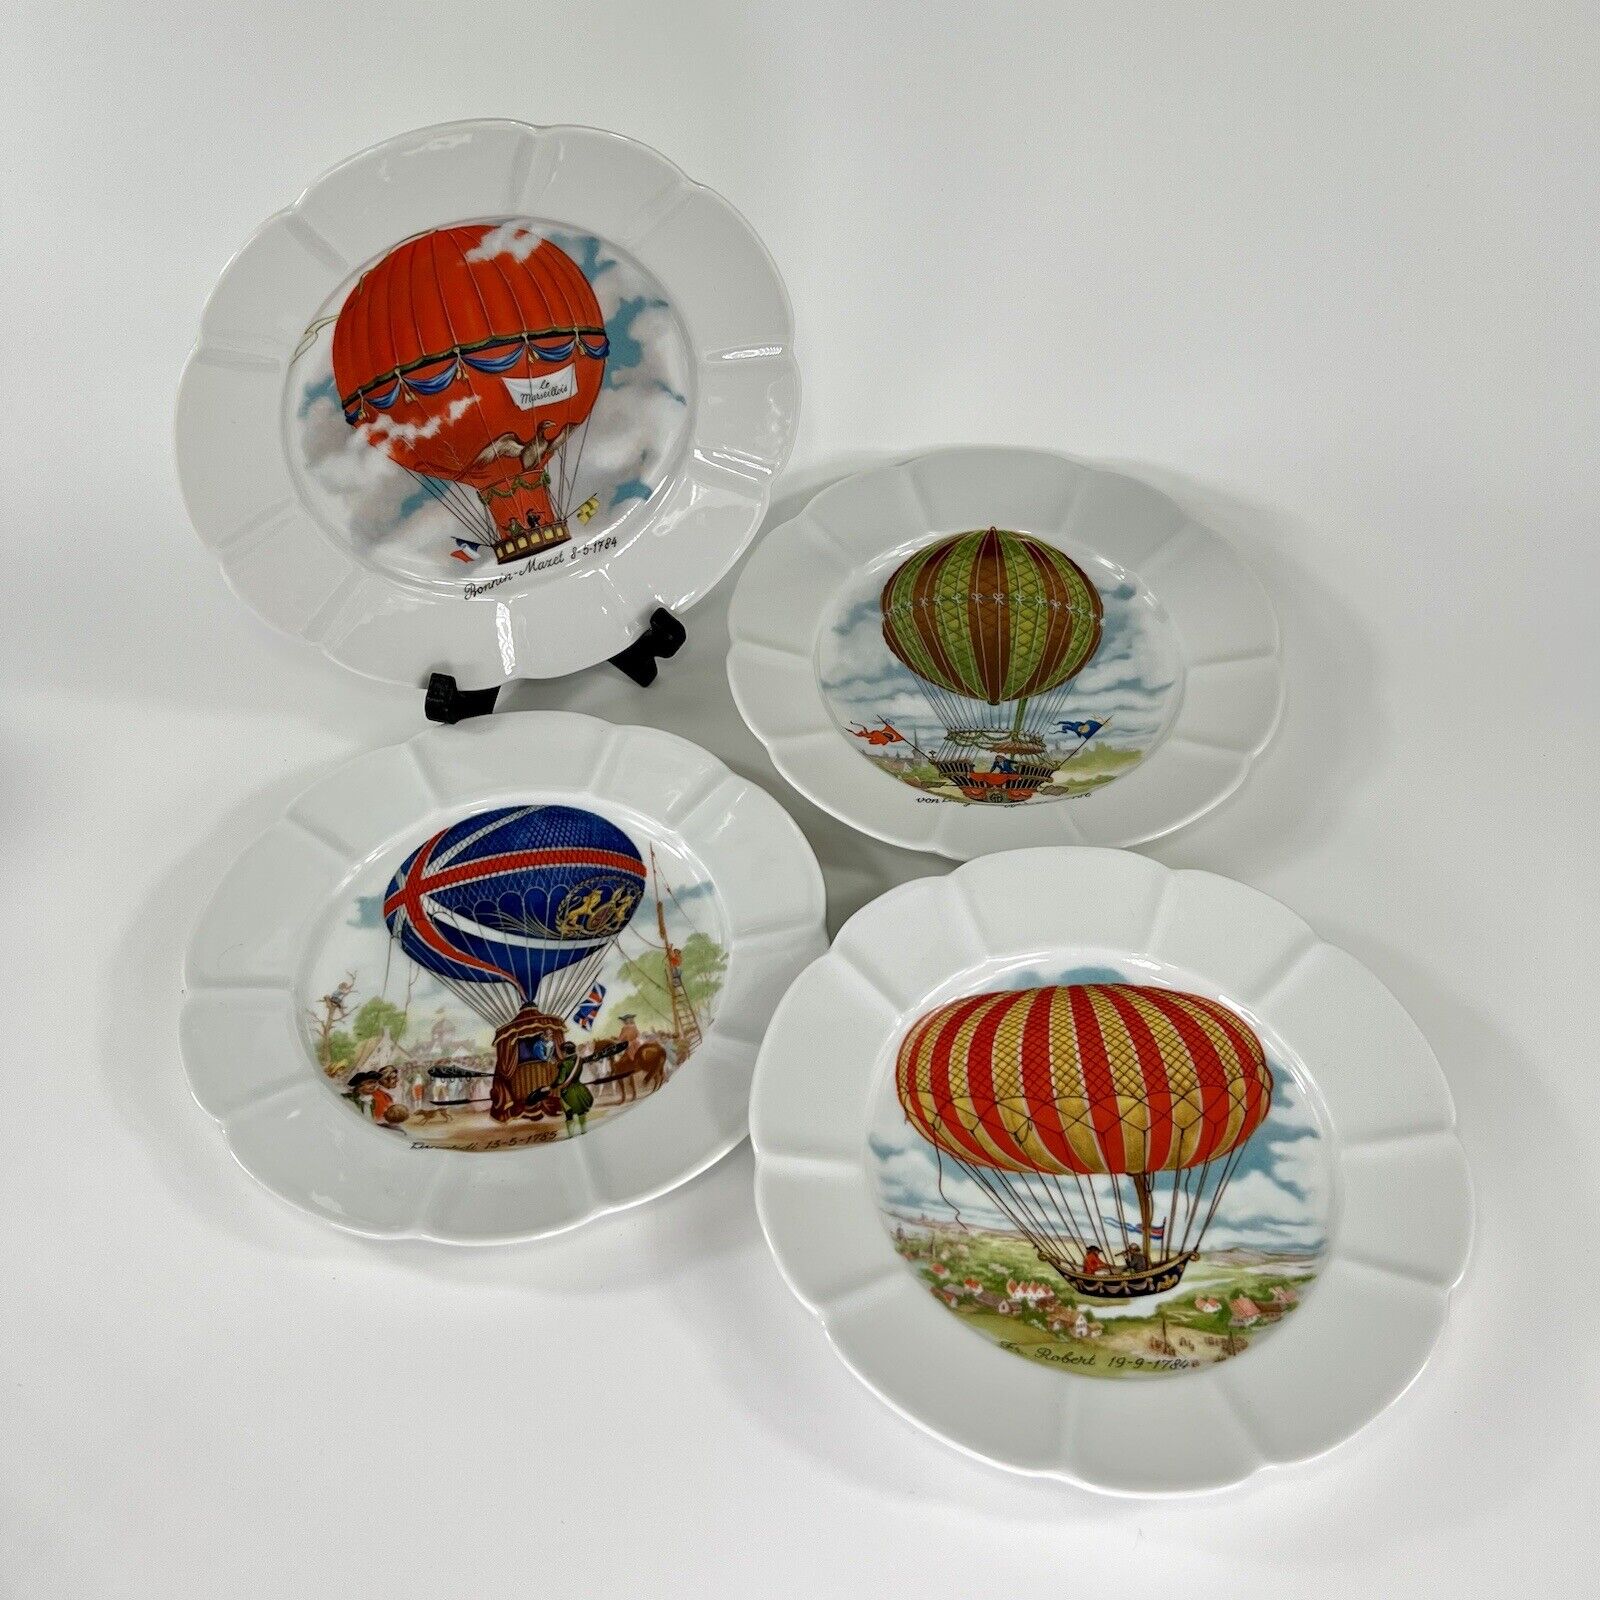 Paris Collection Set of 4 Porcelain Plates Hot Air Balloons Made in France 7.75”